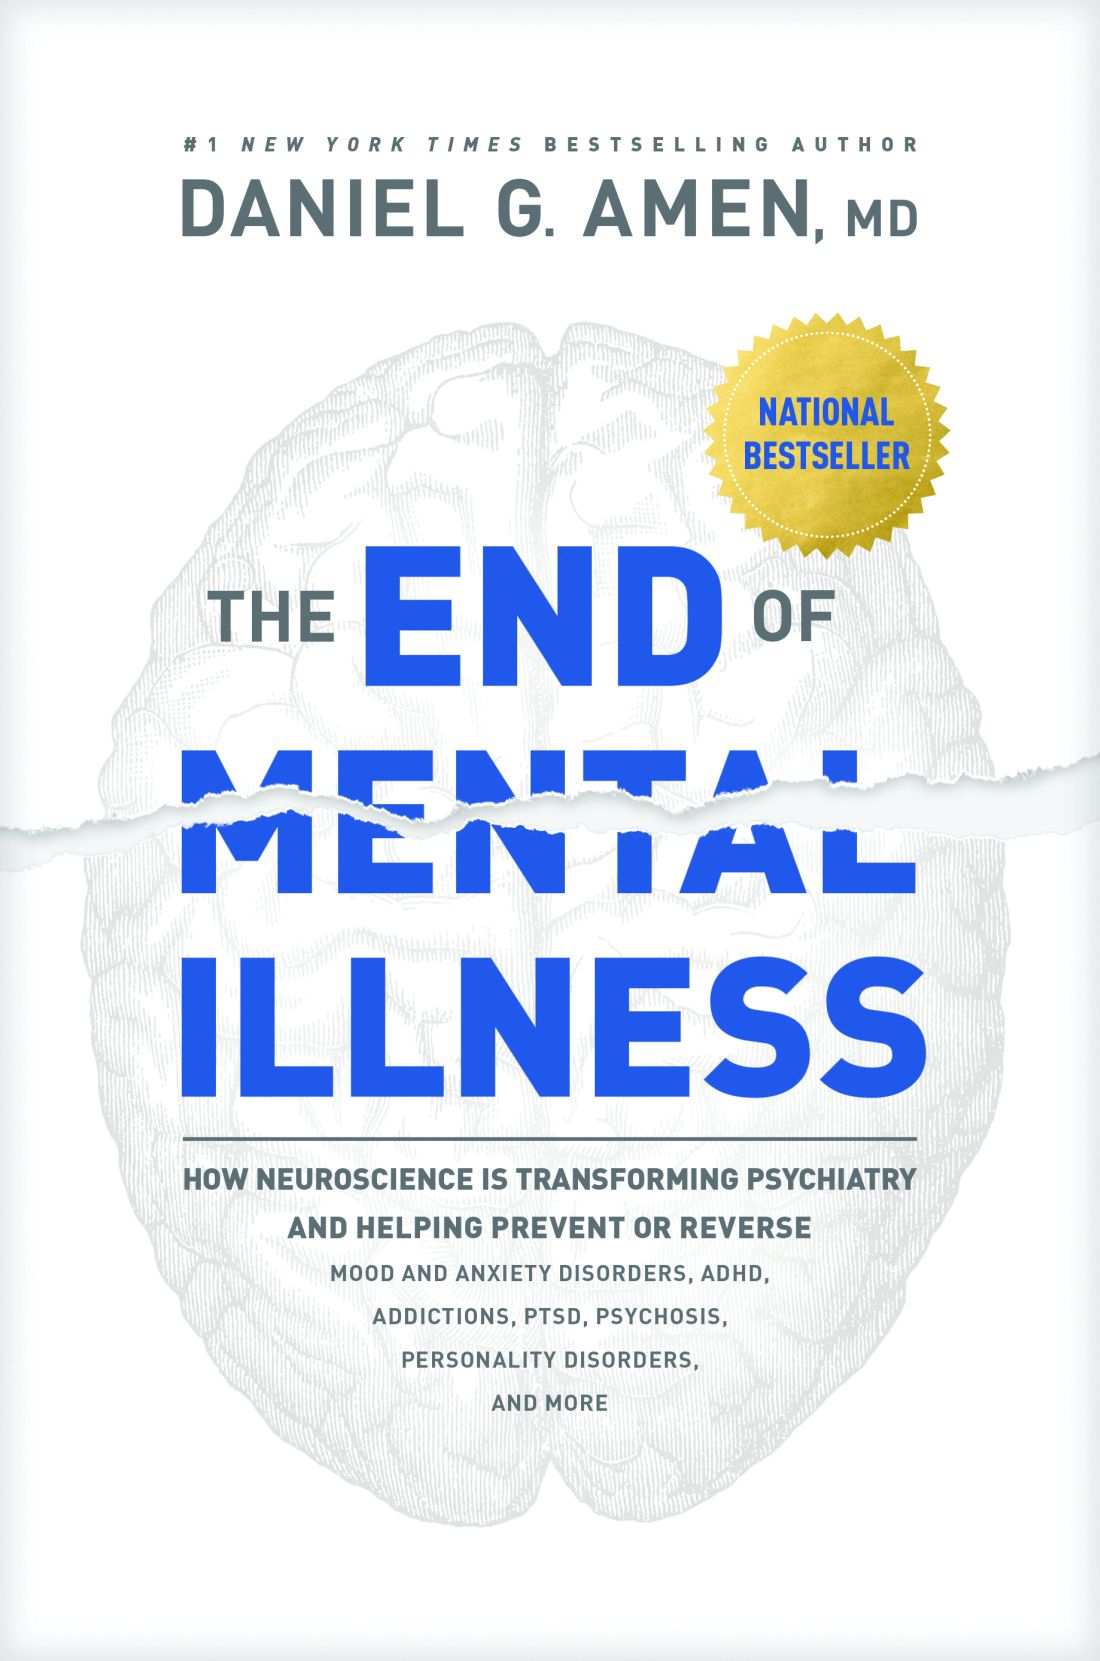 Contradictions abound in 'The End of Mental Illness